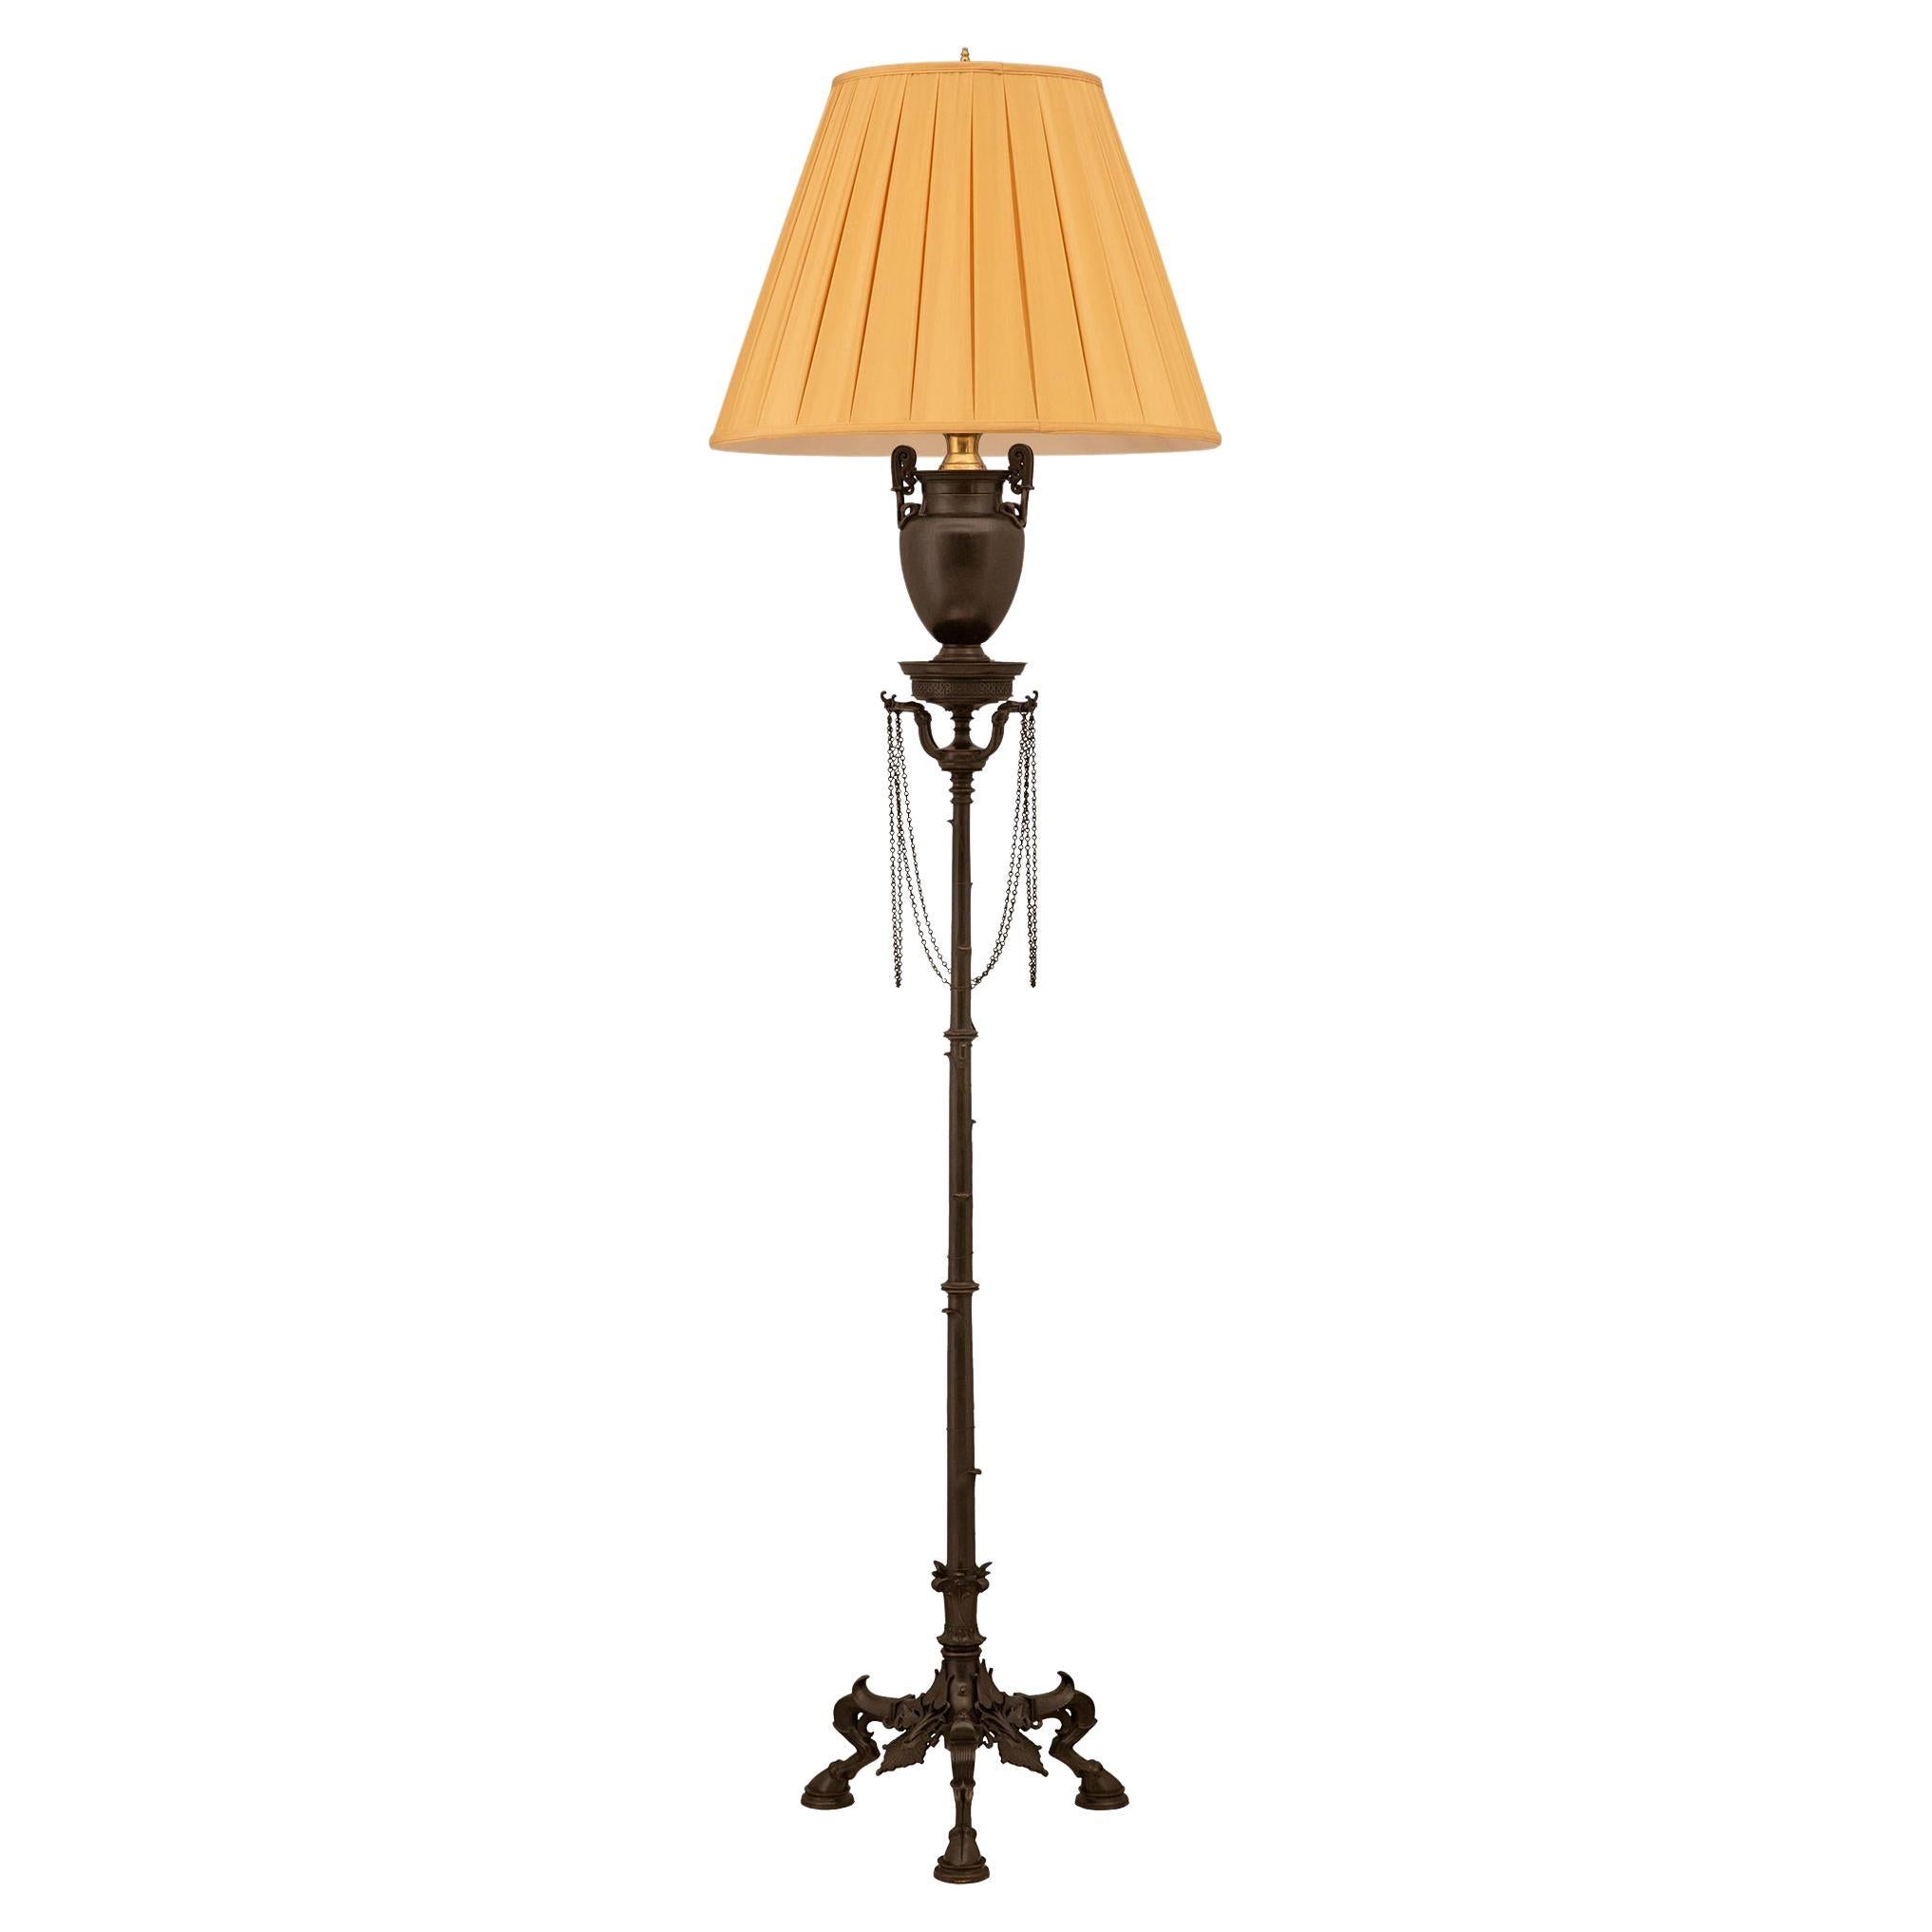 French Mid-19th Century Neoclassical Style Solid Bronze and Ormolu Floor Lamp For Sale